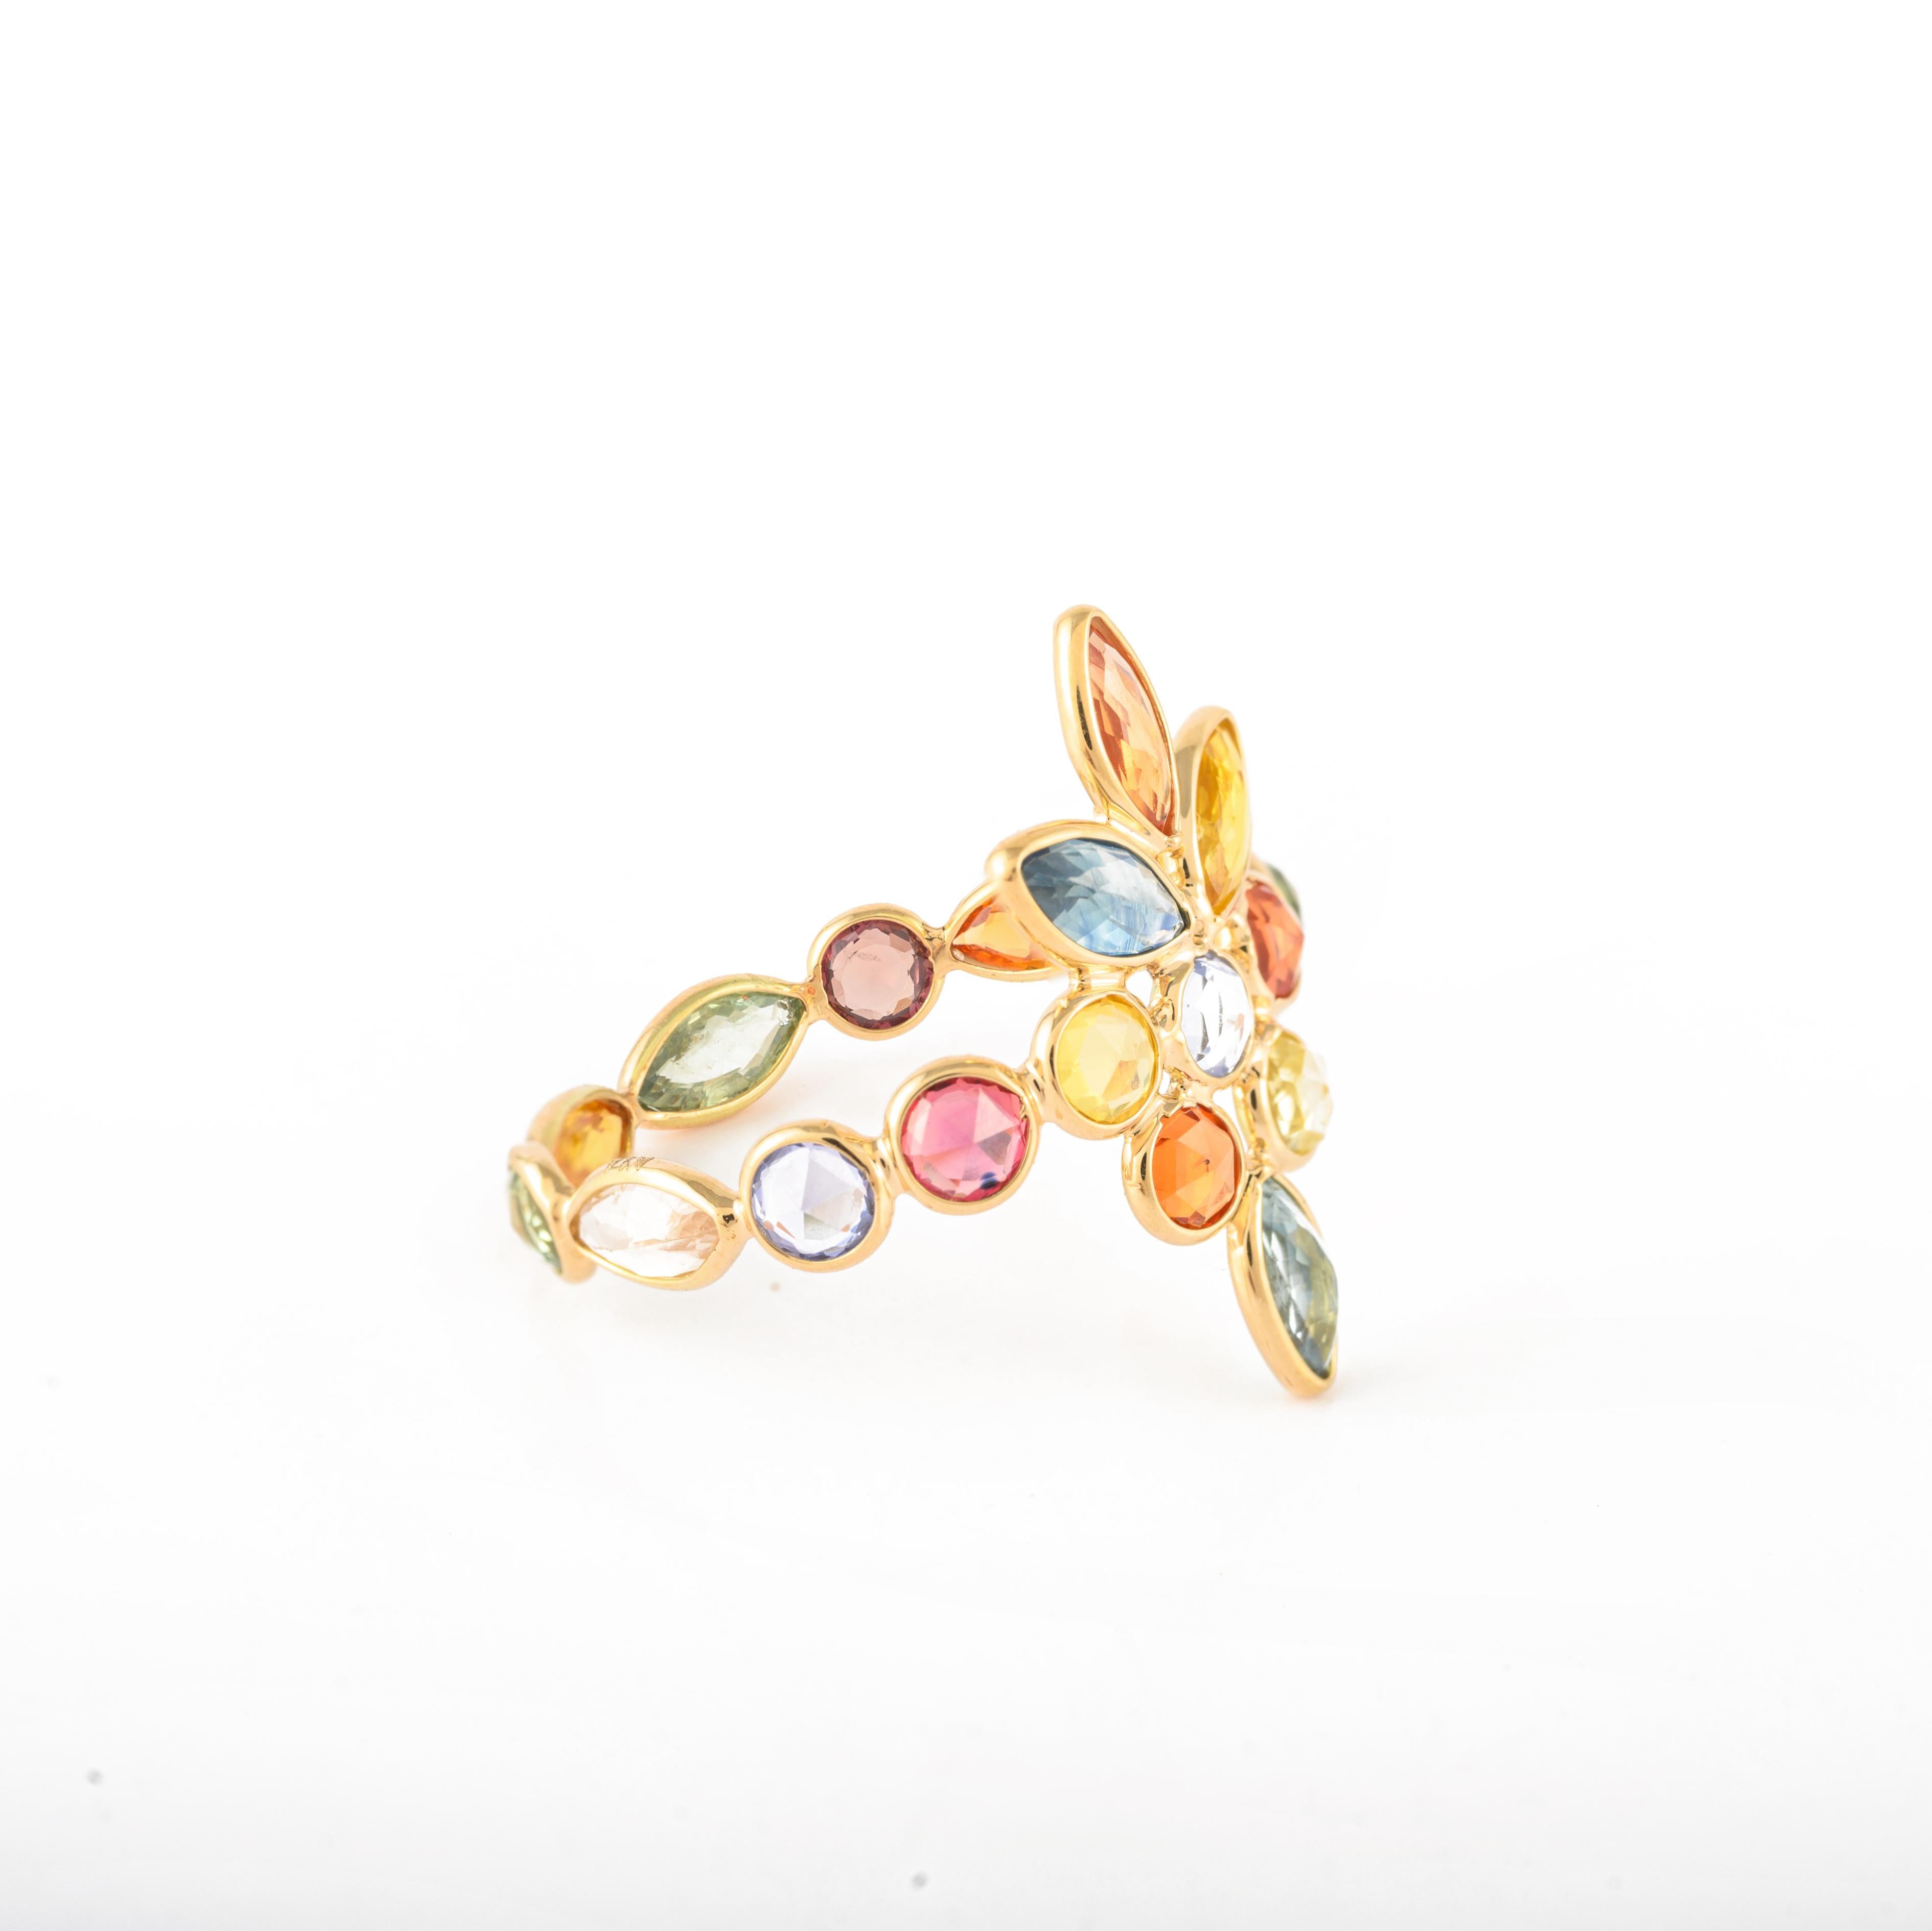 For Sale:  4.81ct Multi Sapphire Elongated Floral Ring in 14k Solid Yellow Gold 5